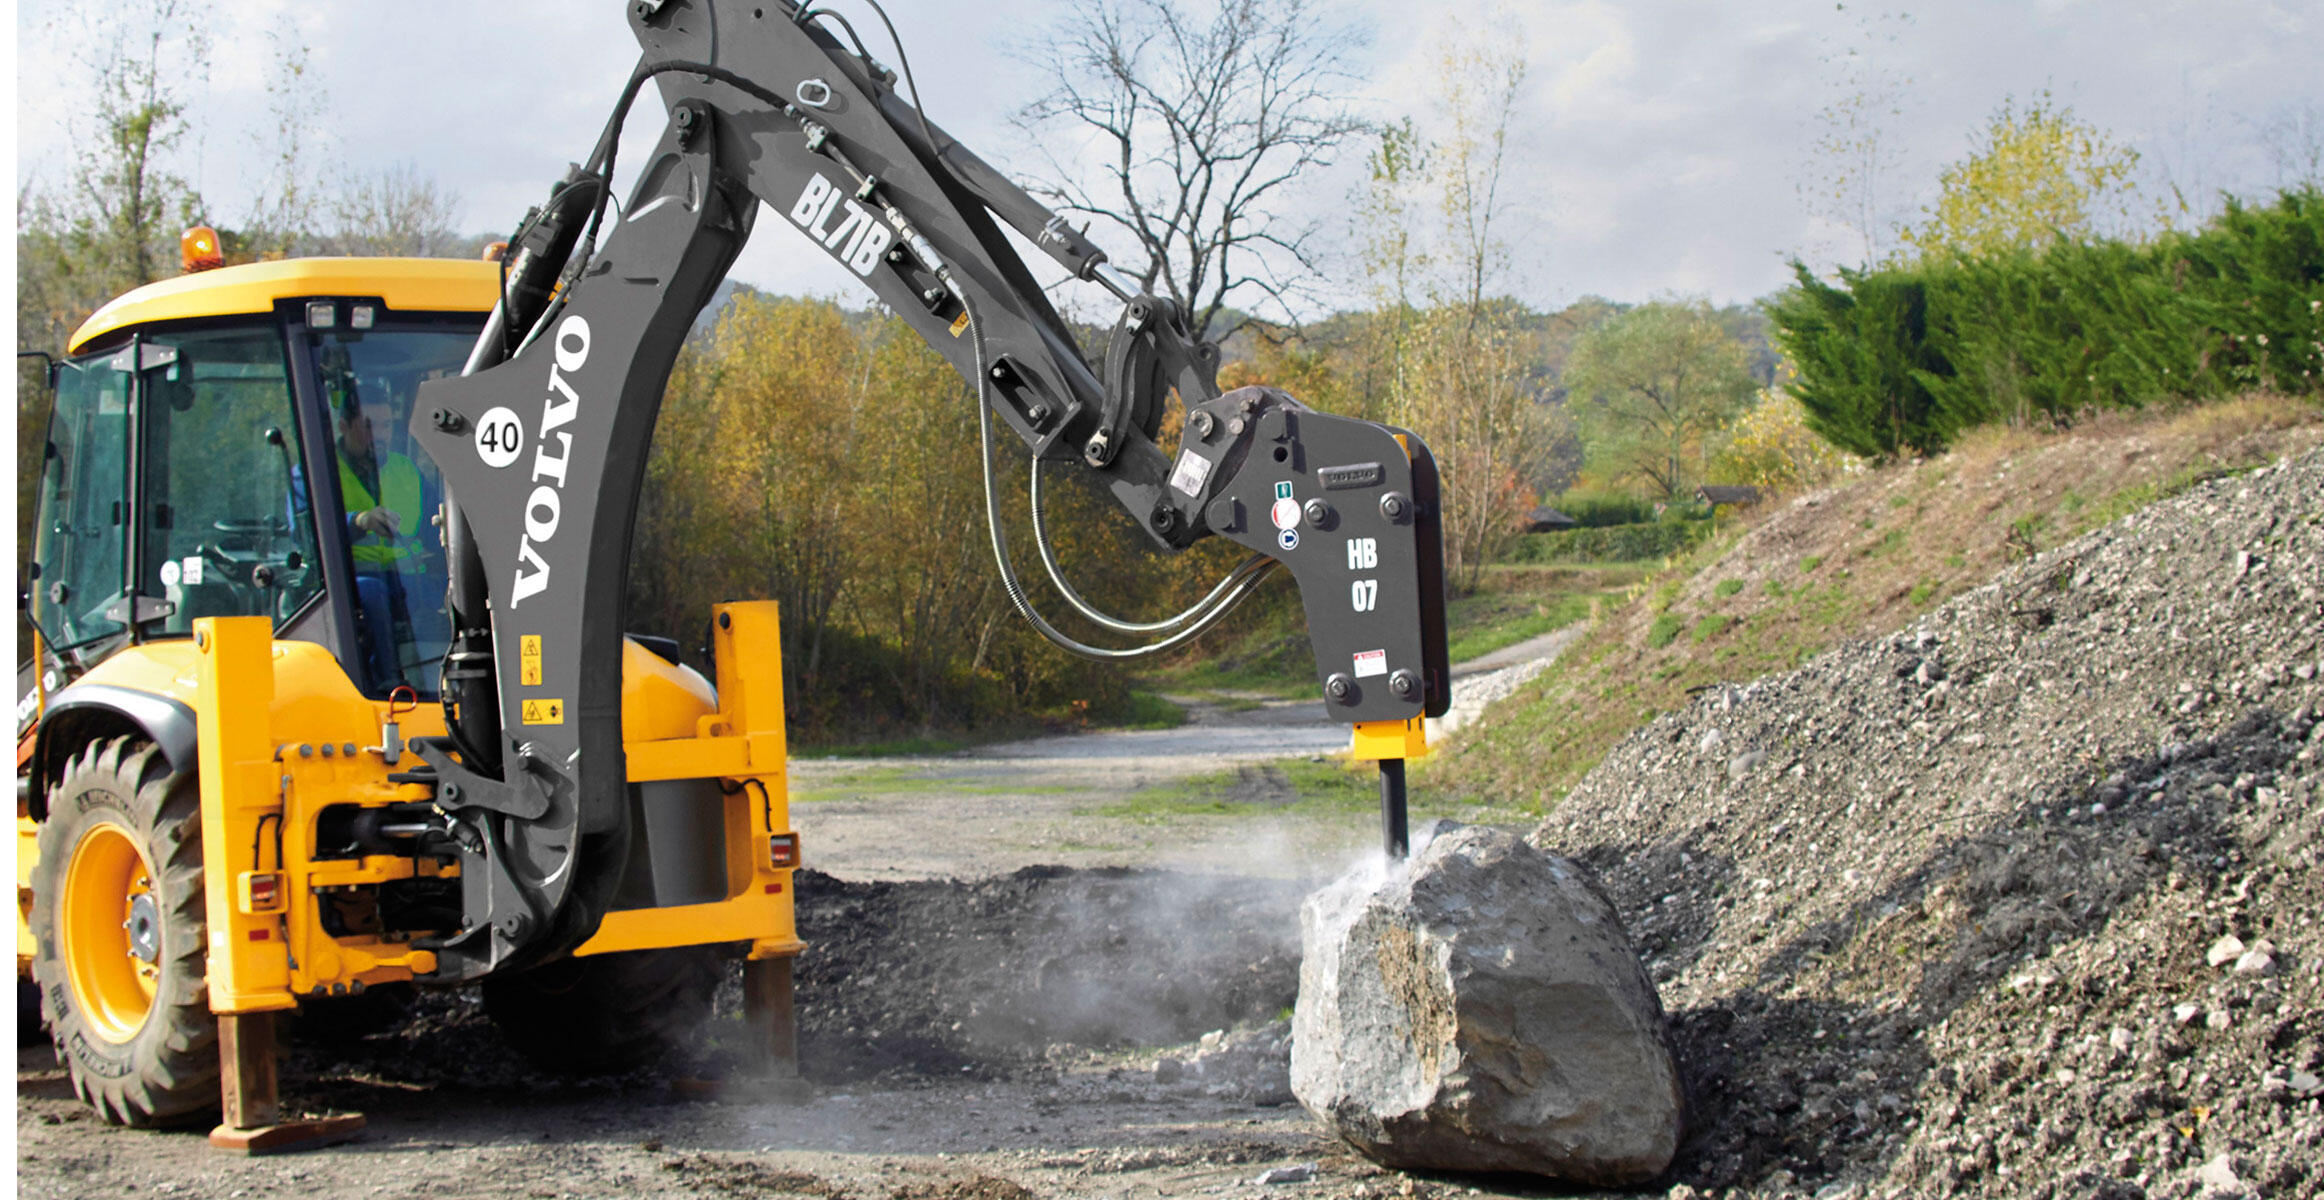 Volvo introduces hydraulic breakers for utility machines